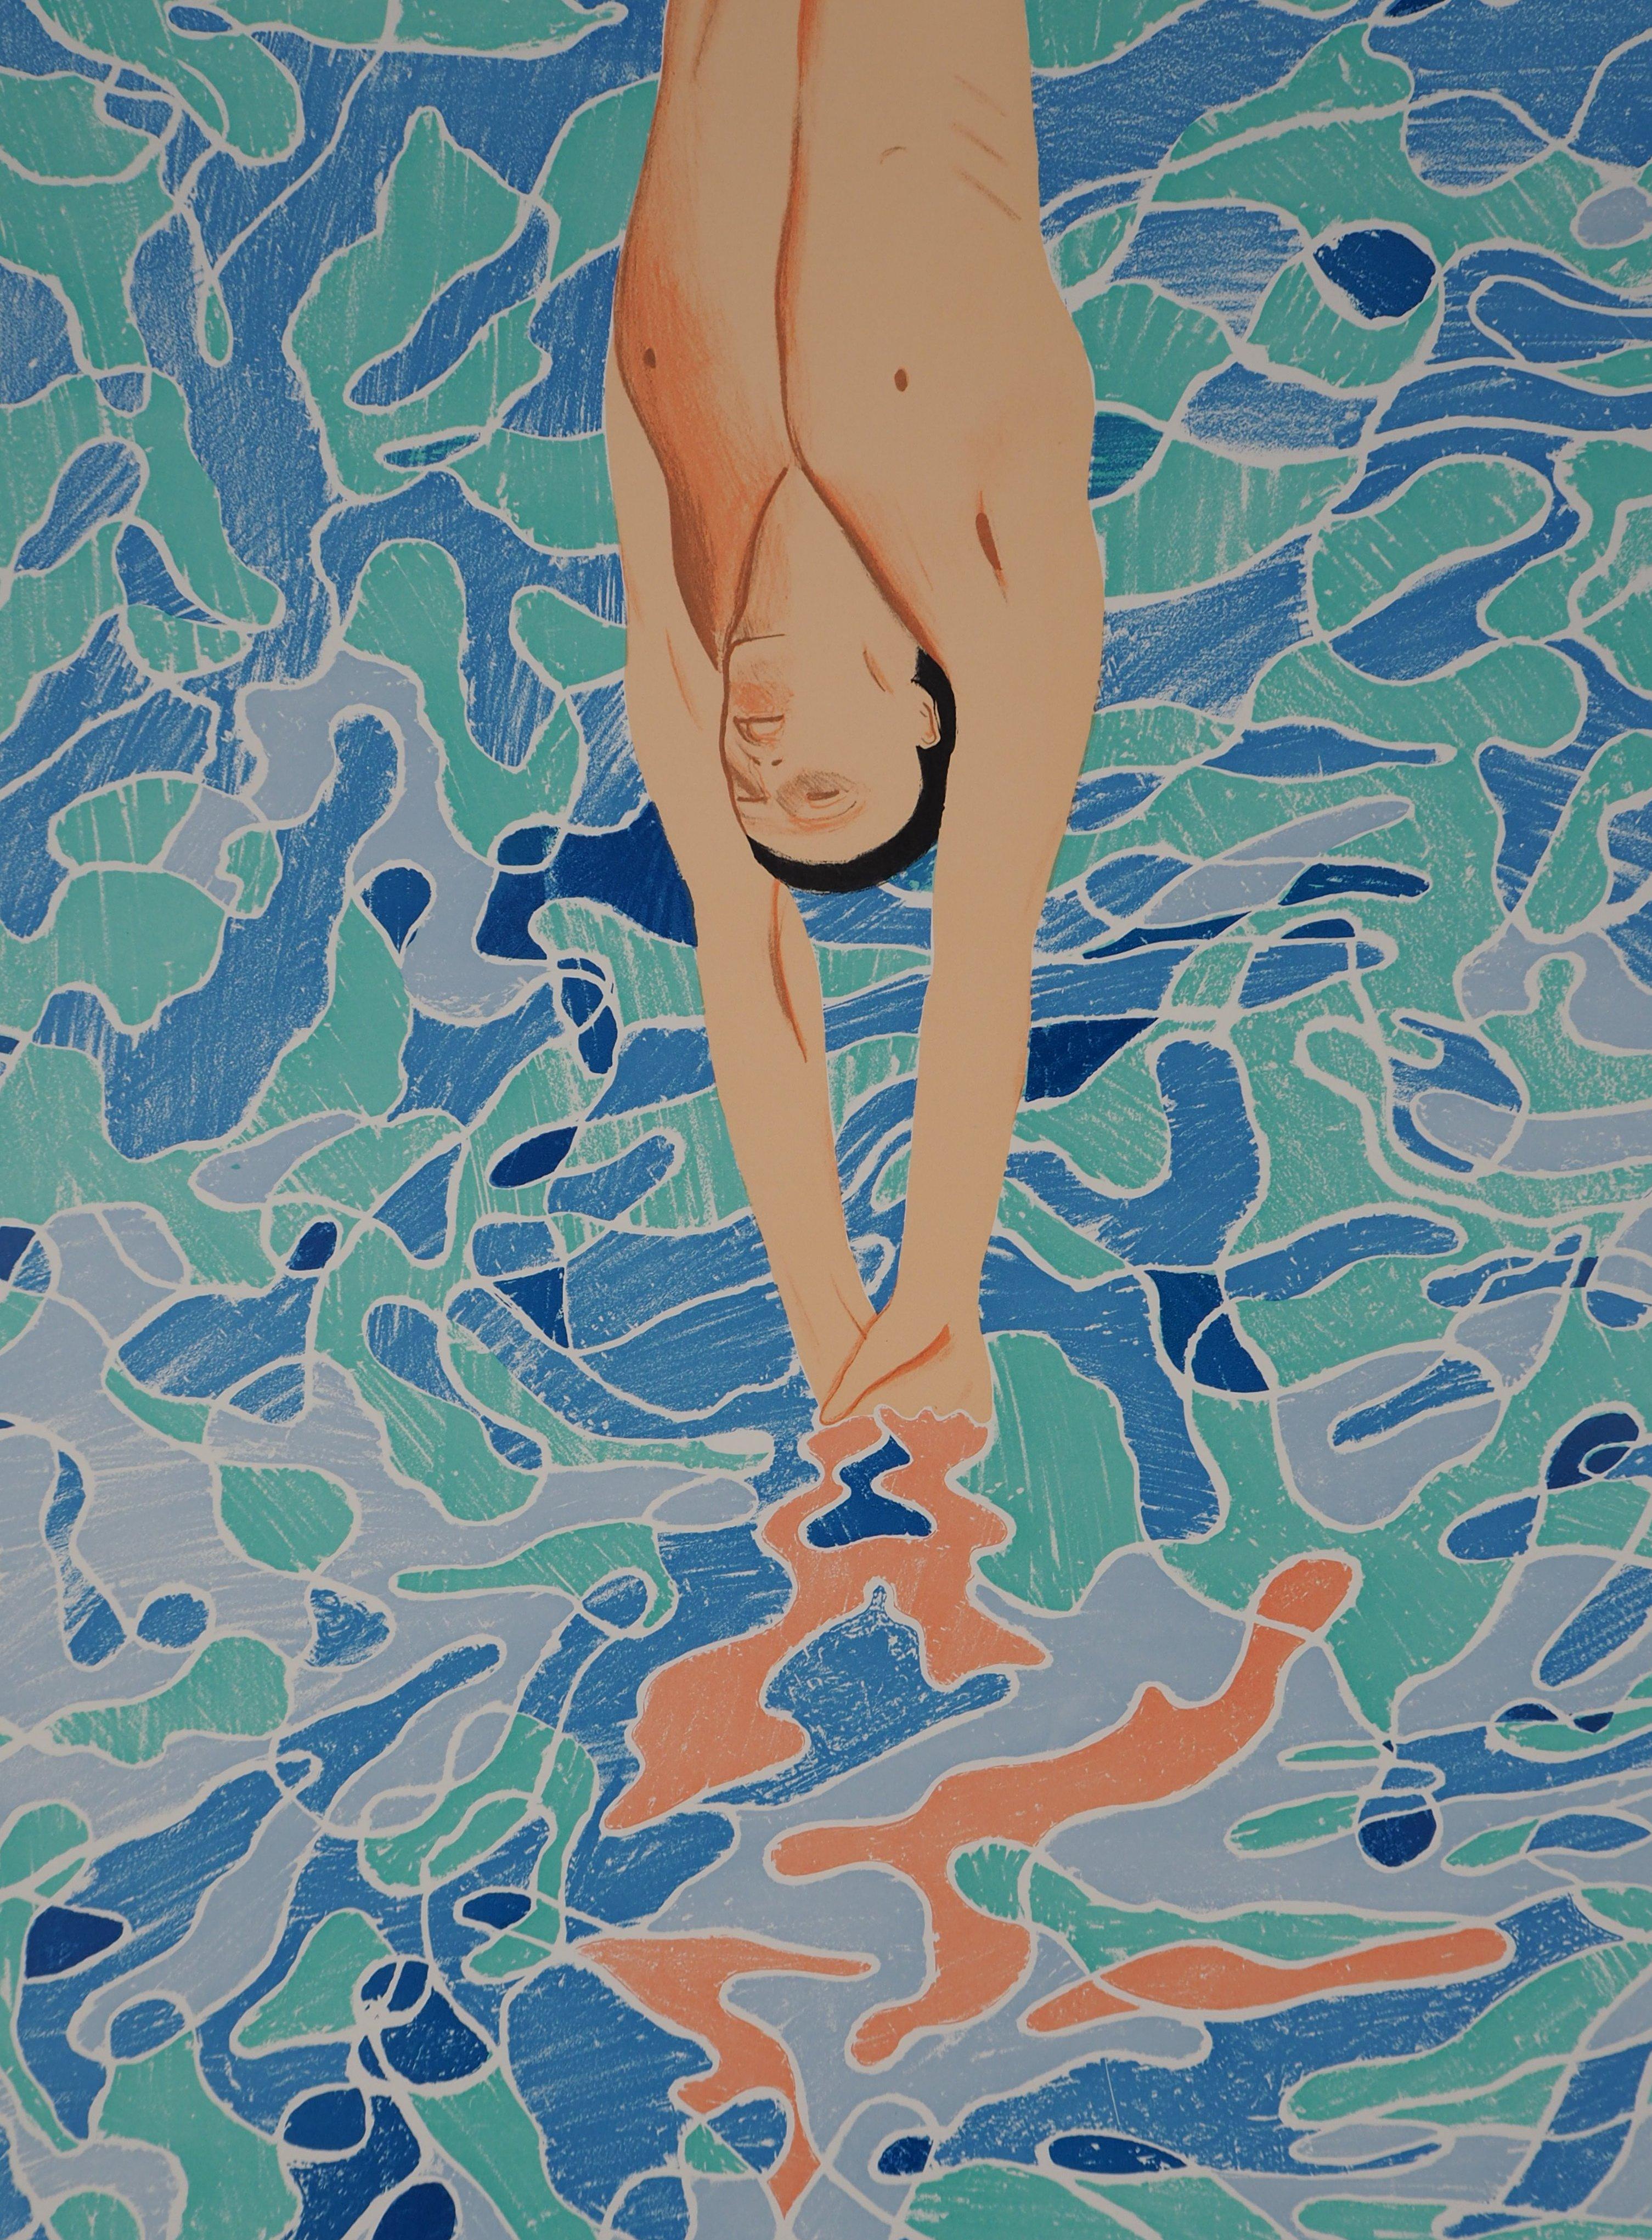 Pool Diver - Lithograph (Olympic Games Munich 1972) - Gray Figurative Print by David Hockney